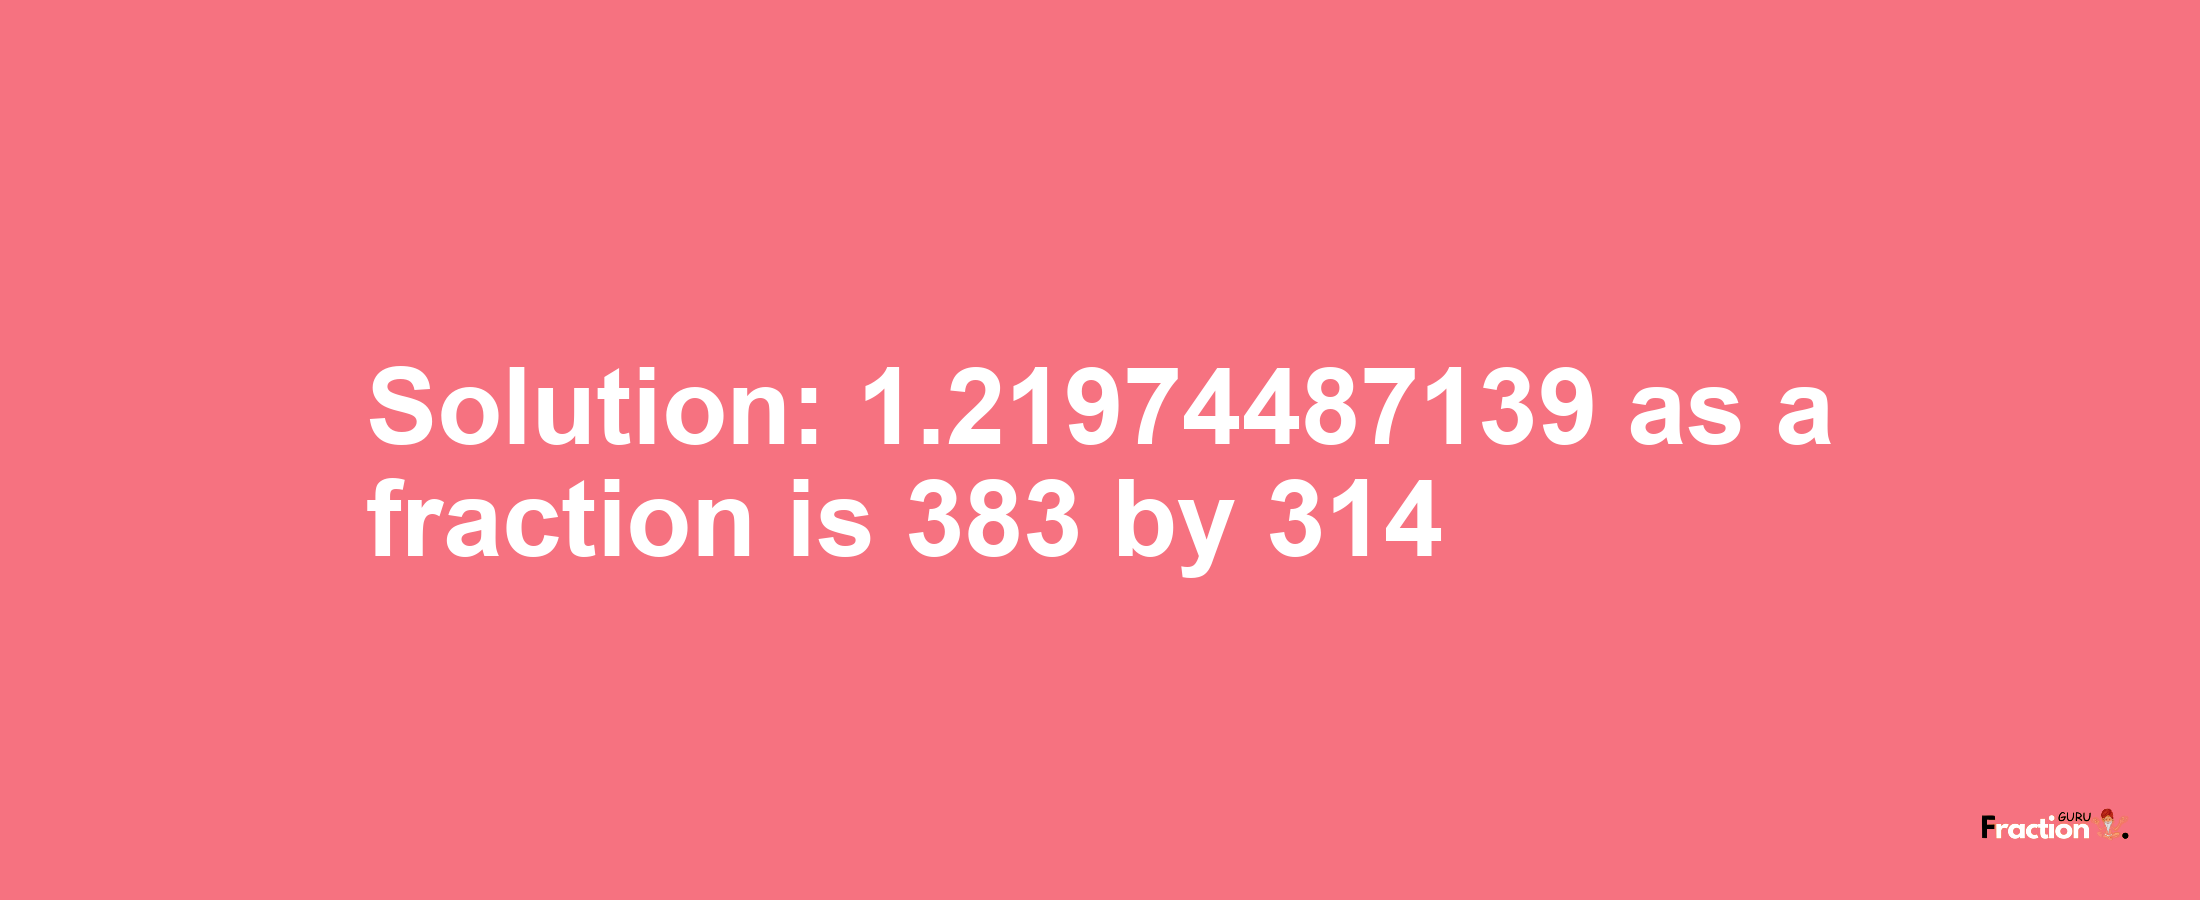 Solution:1.21974487139 as a fraction is 383/314